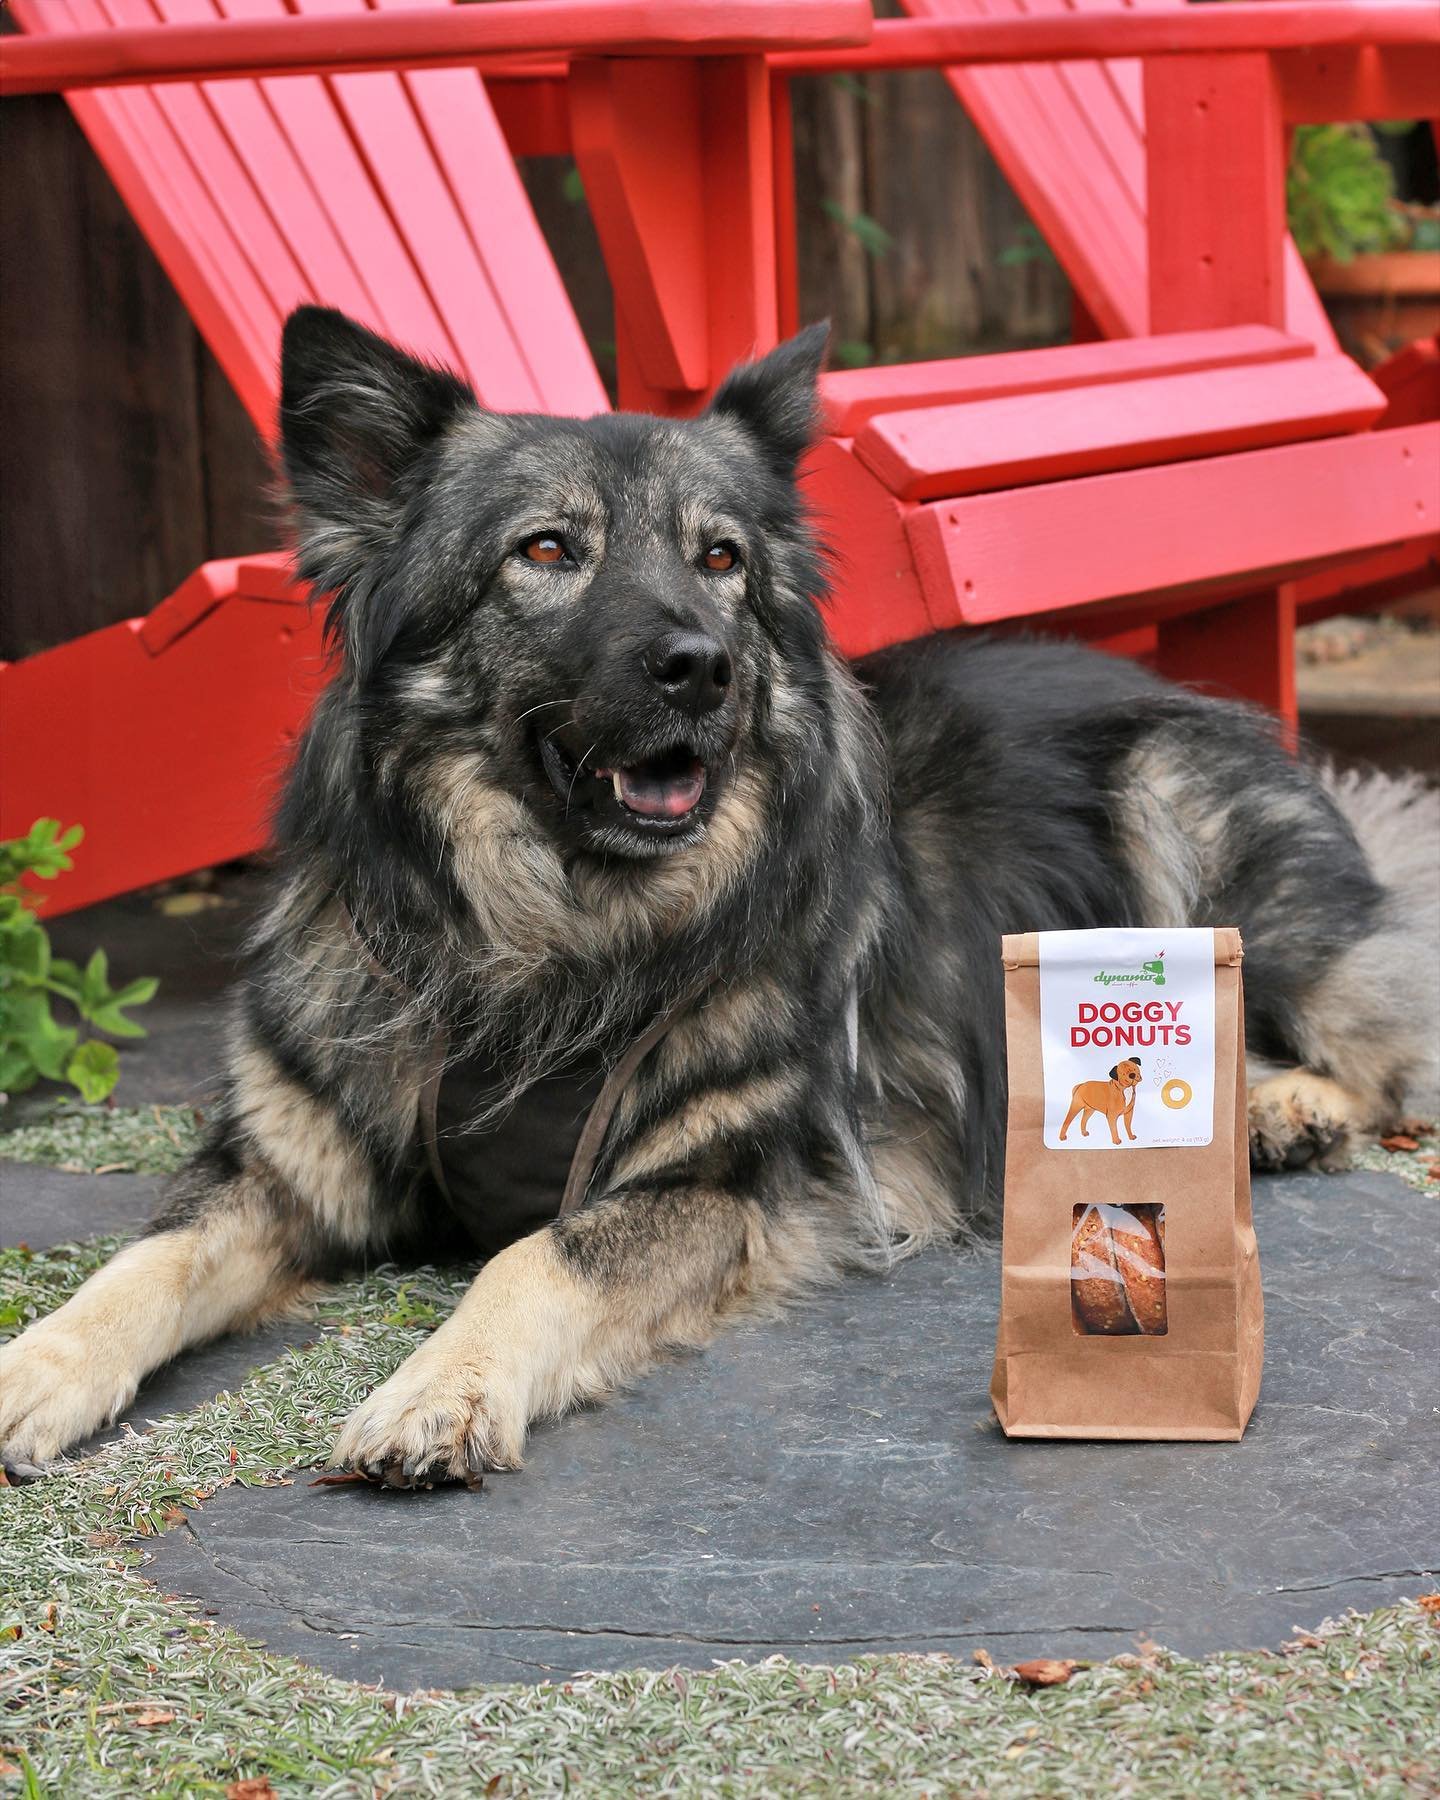 Donuts are for dogs too 🐶&hearts;️🍩

Our Doggy Donuts are made daily to ensure a fresh treat every time!

Grab a bag for your pup and share the donut love 💕